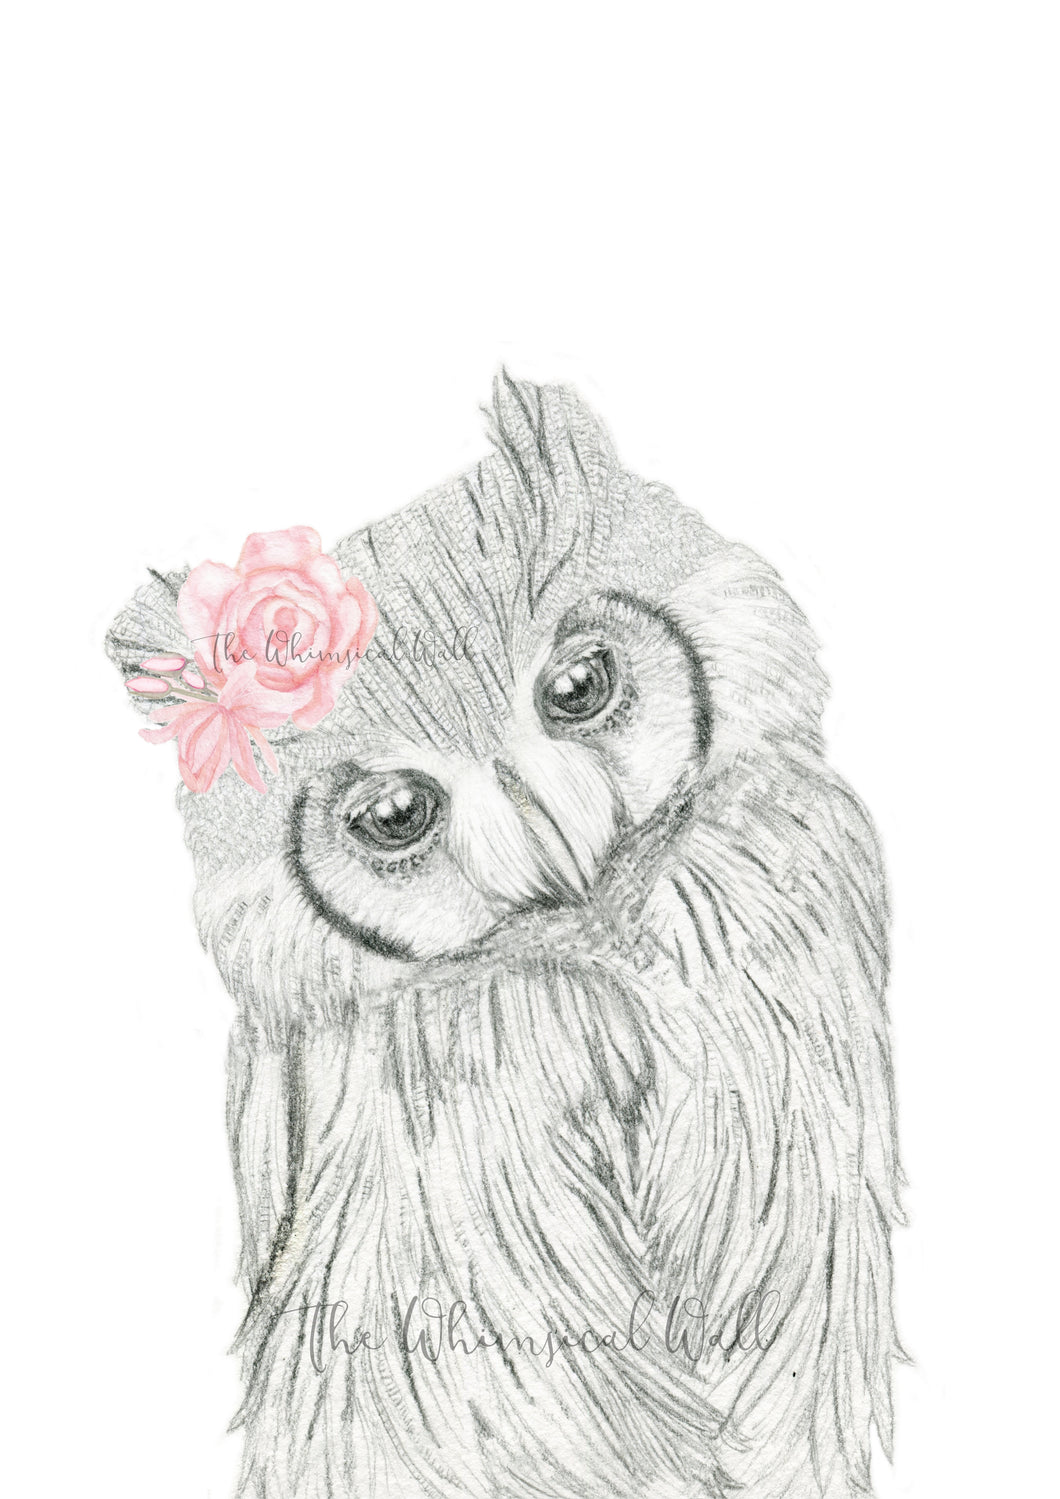 Owl Drawing with flowers